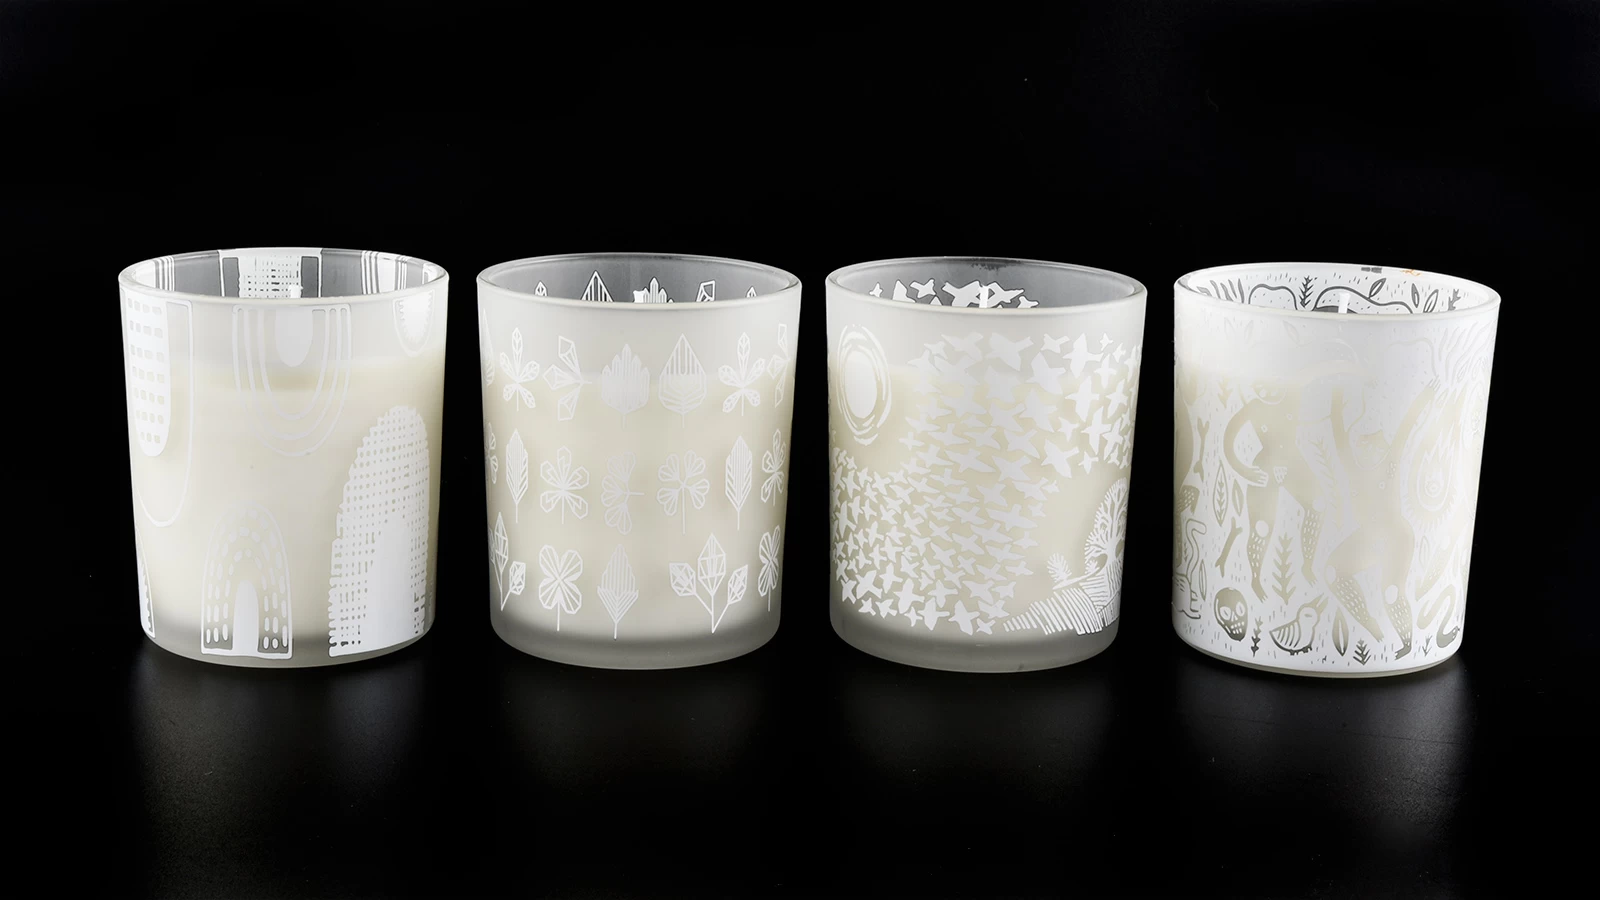 Frosted glass candle holders from Sunny Glassware